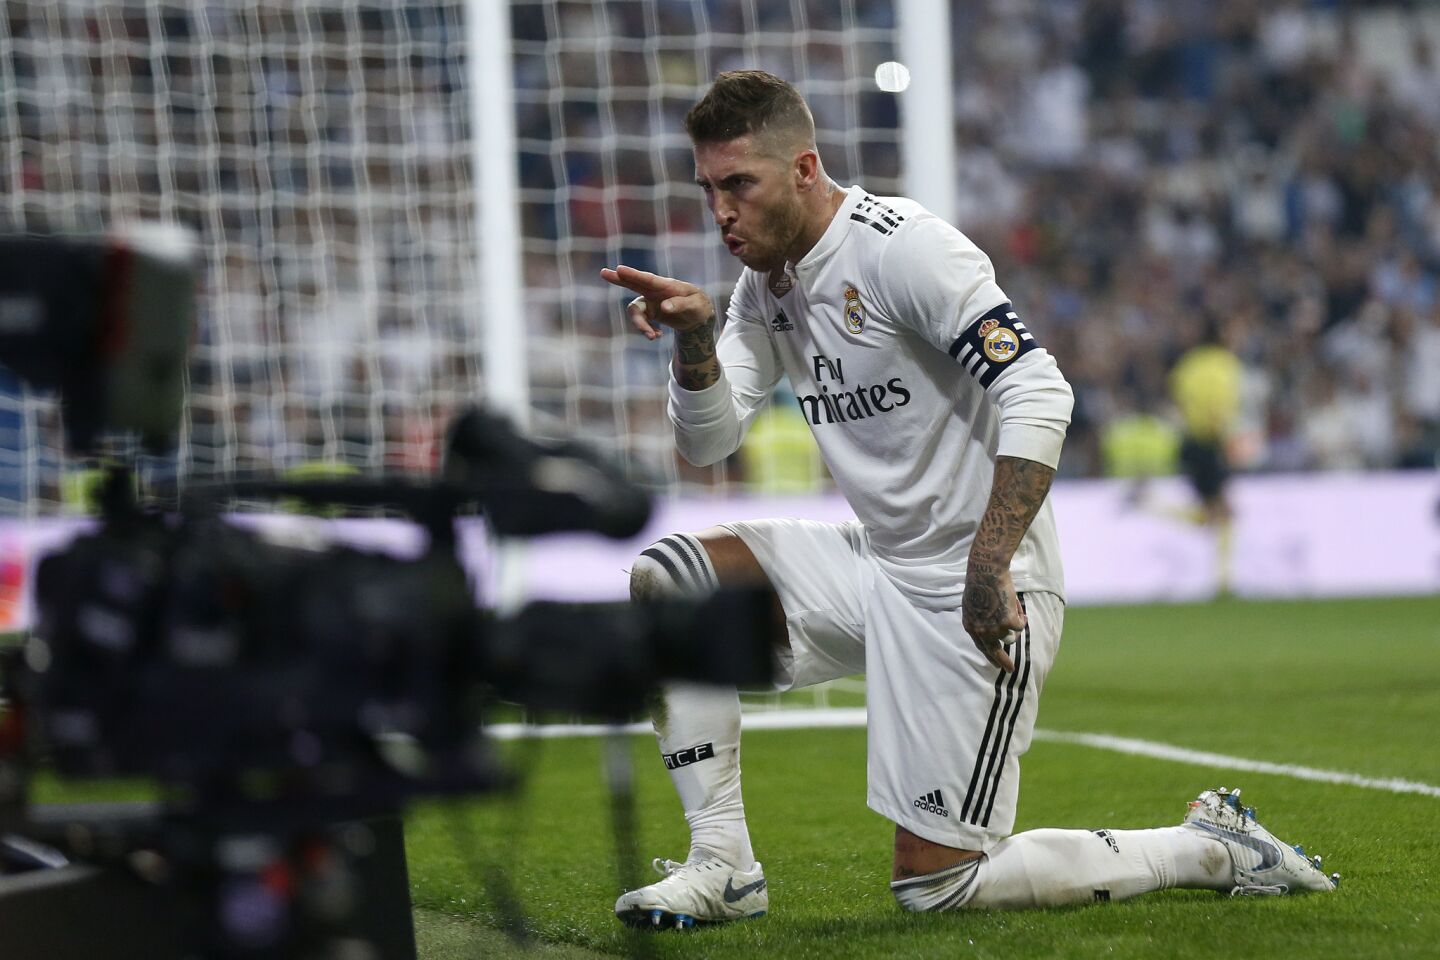 Real Madrid's Sergio Ramos celebrates in front of a TV camera after scoring a penalty and his team'ss fourth goal during the Spanish La Liga soccer match between Real Madrid and Leganes at the Santiago Bernabeu stadium in Madrid, Saturday, Sep. 1, 2018. (AP Photo/Andrea Comas)